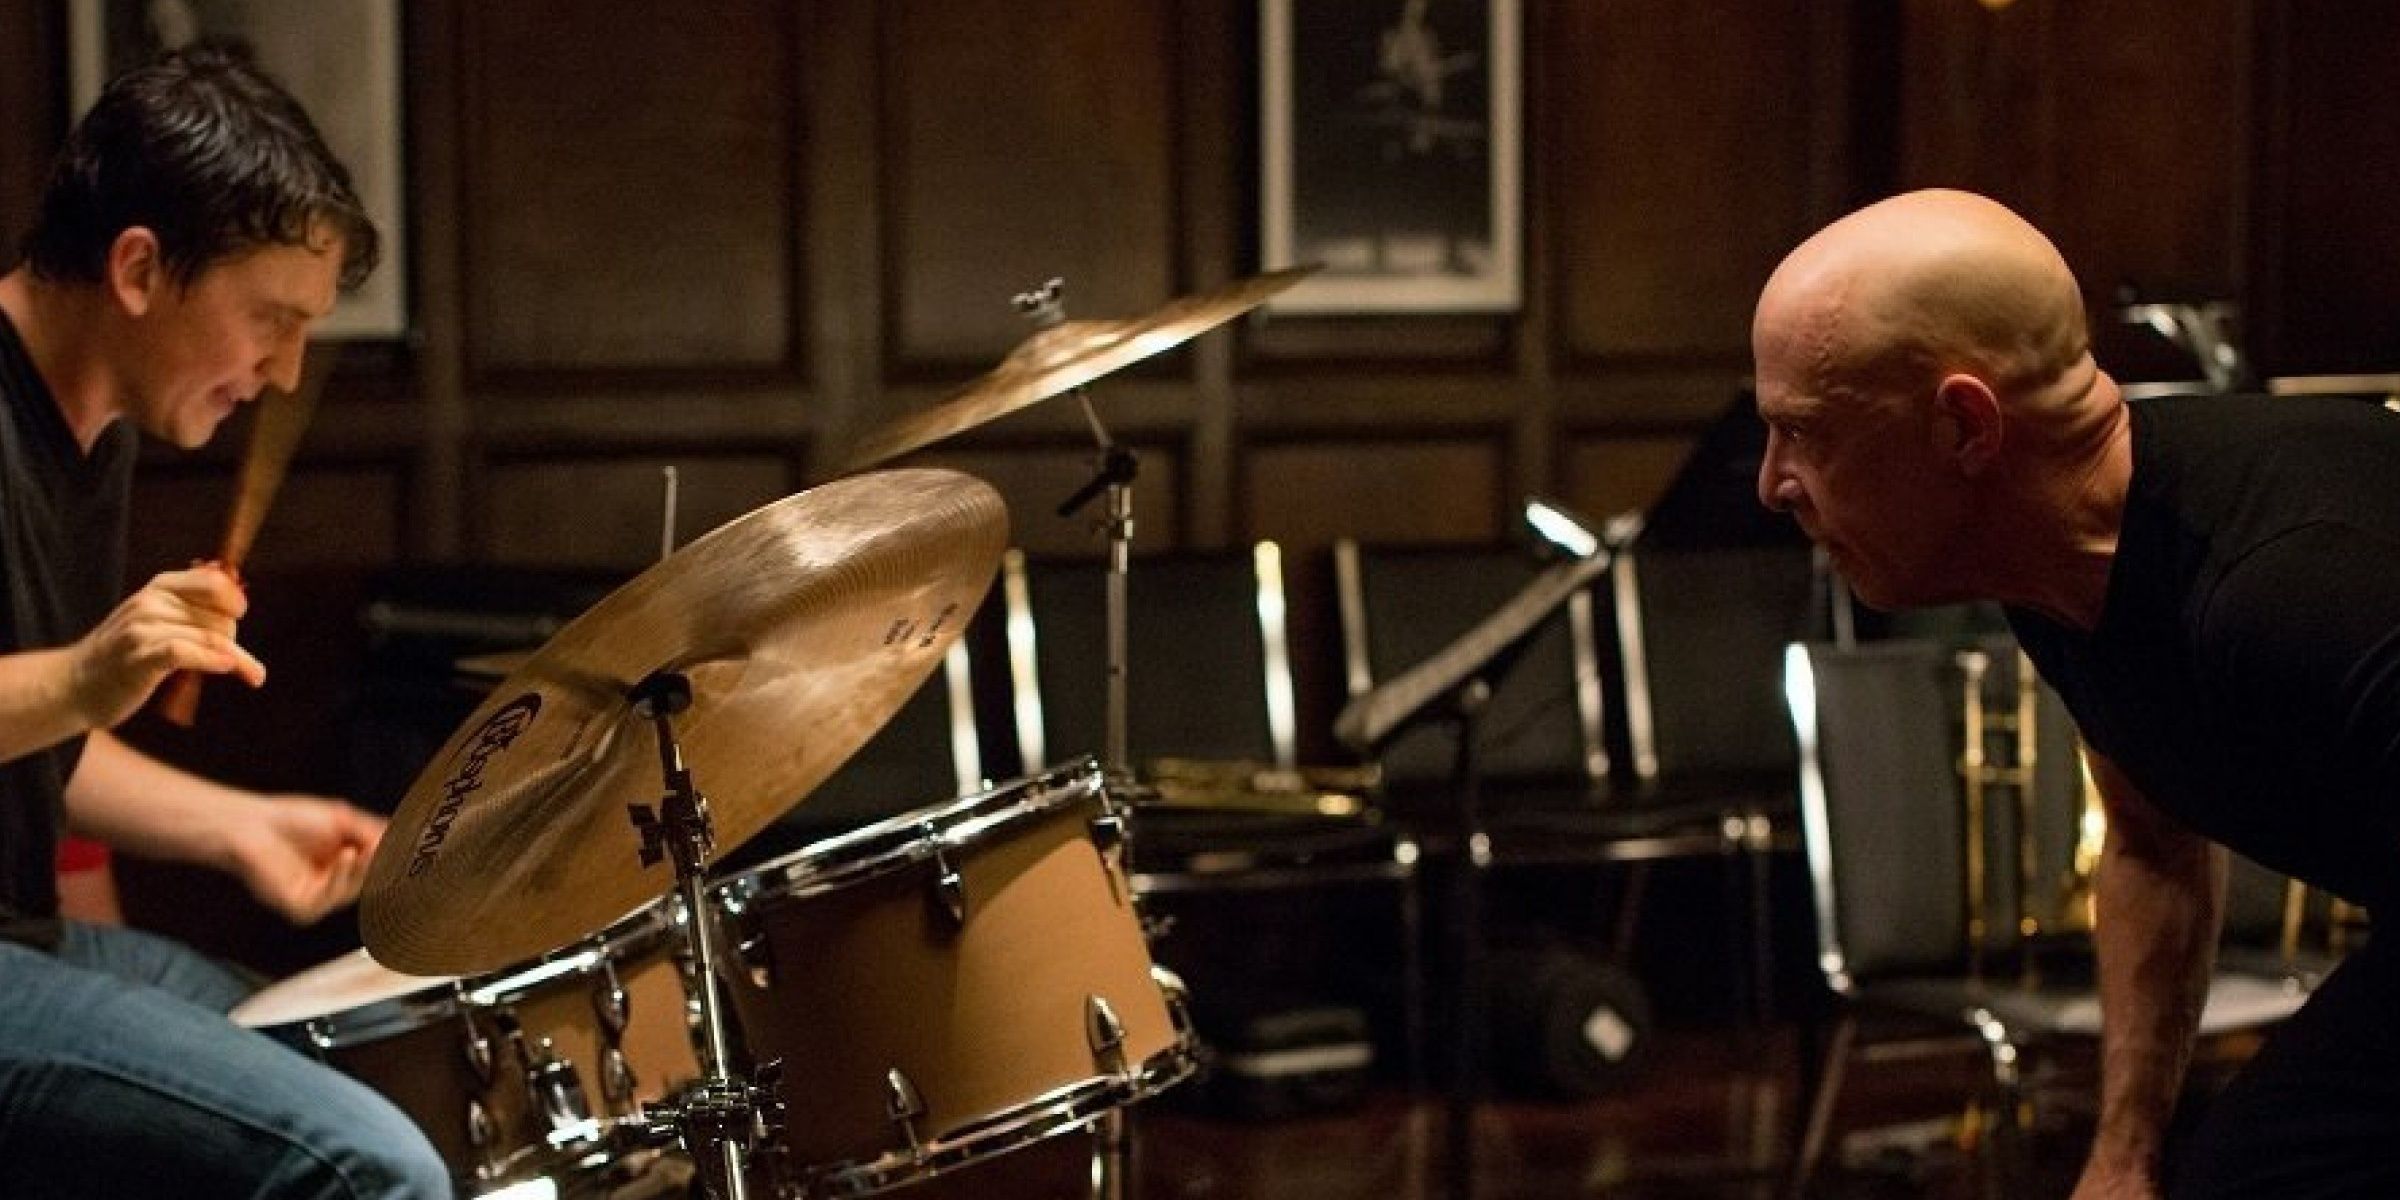 JK Simmons watched Miles Teller play drums in Whiplash